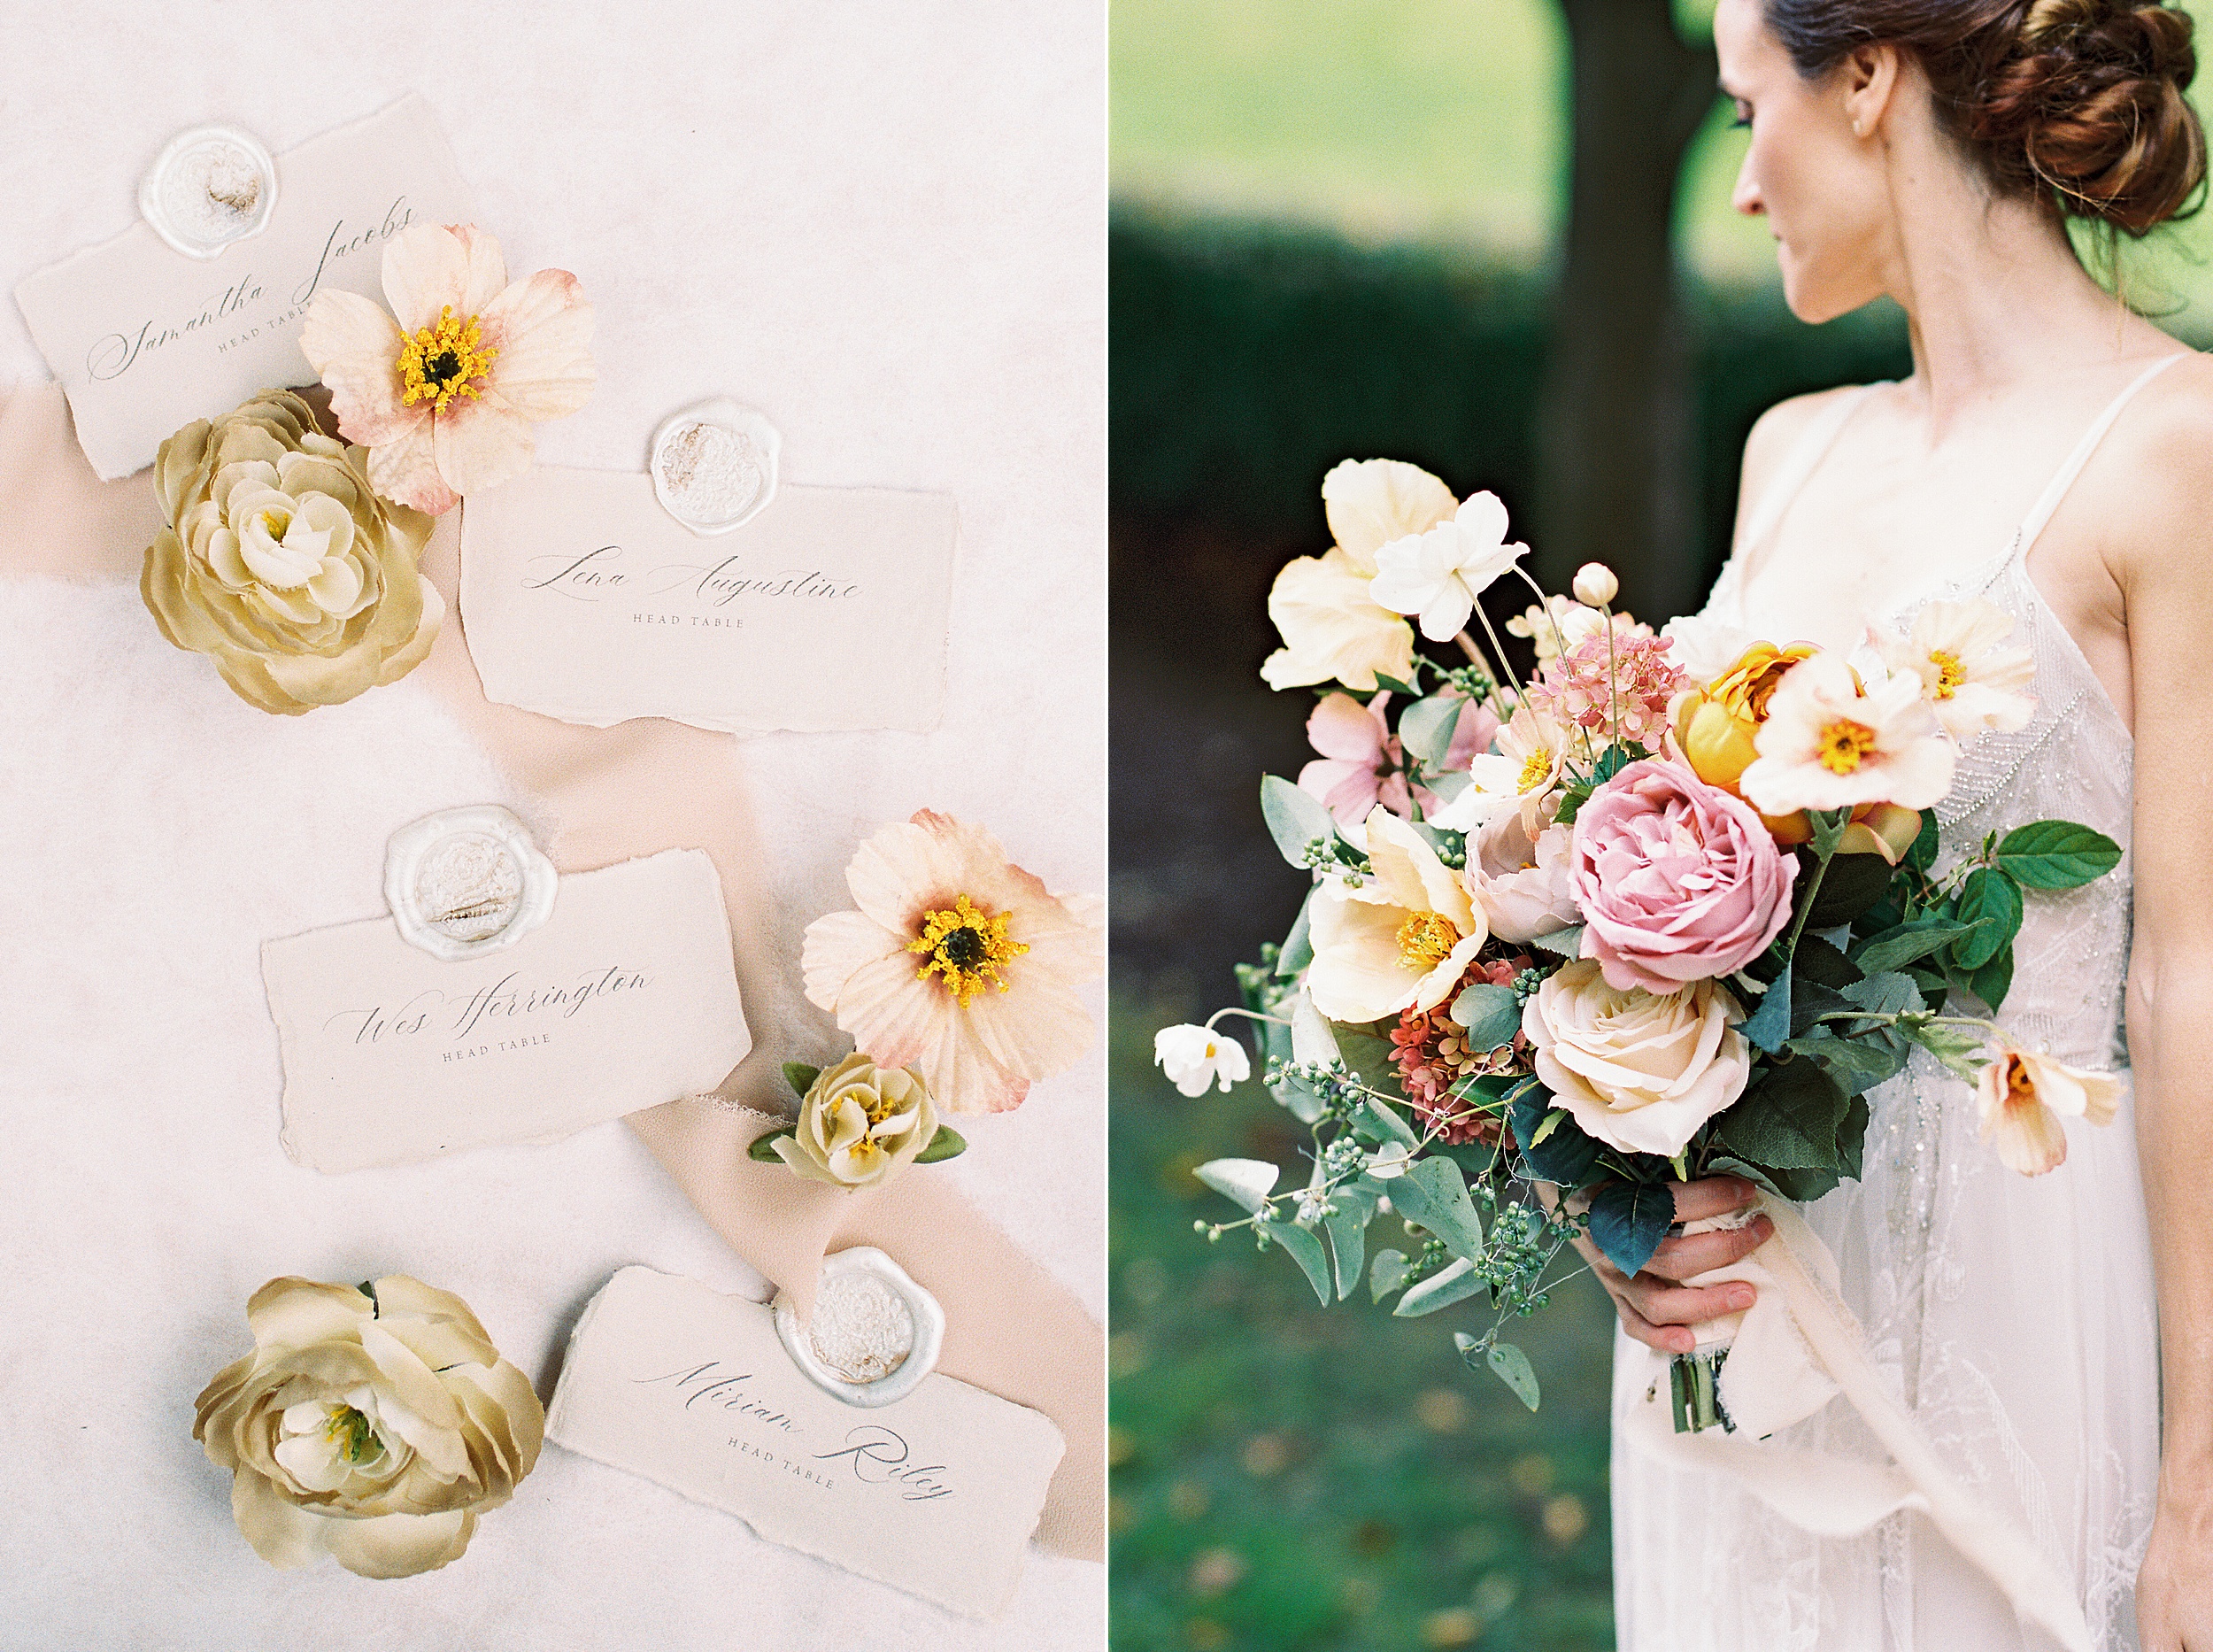 stationery with watercolor and velvet details and bridal bouquet in fall tones